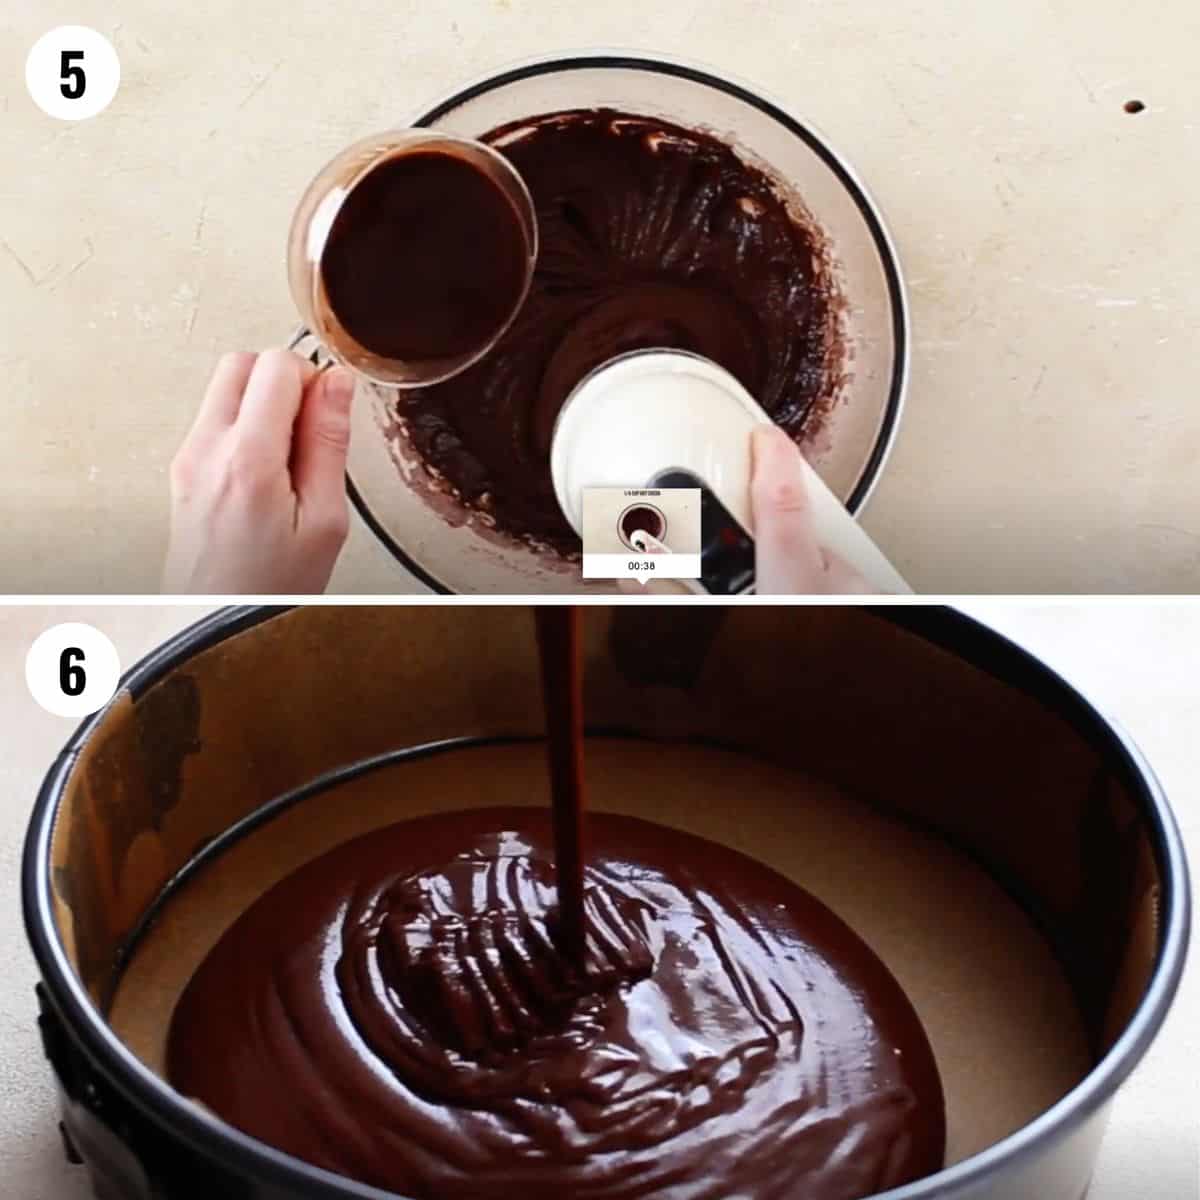 Adding hot cocoa to the cake batter and then pouring it into a baking pan.